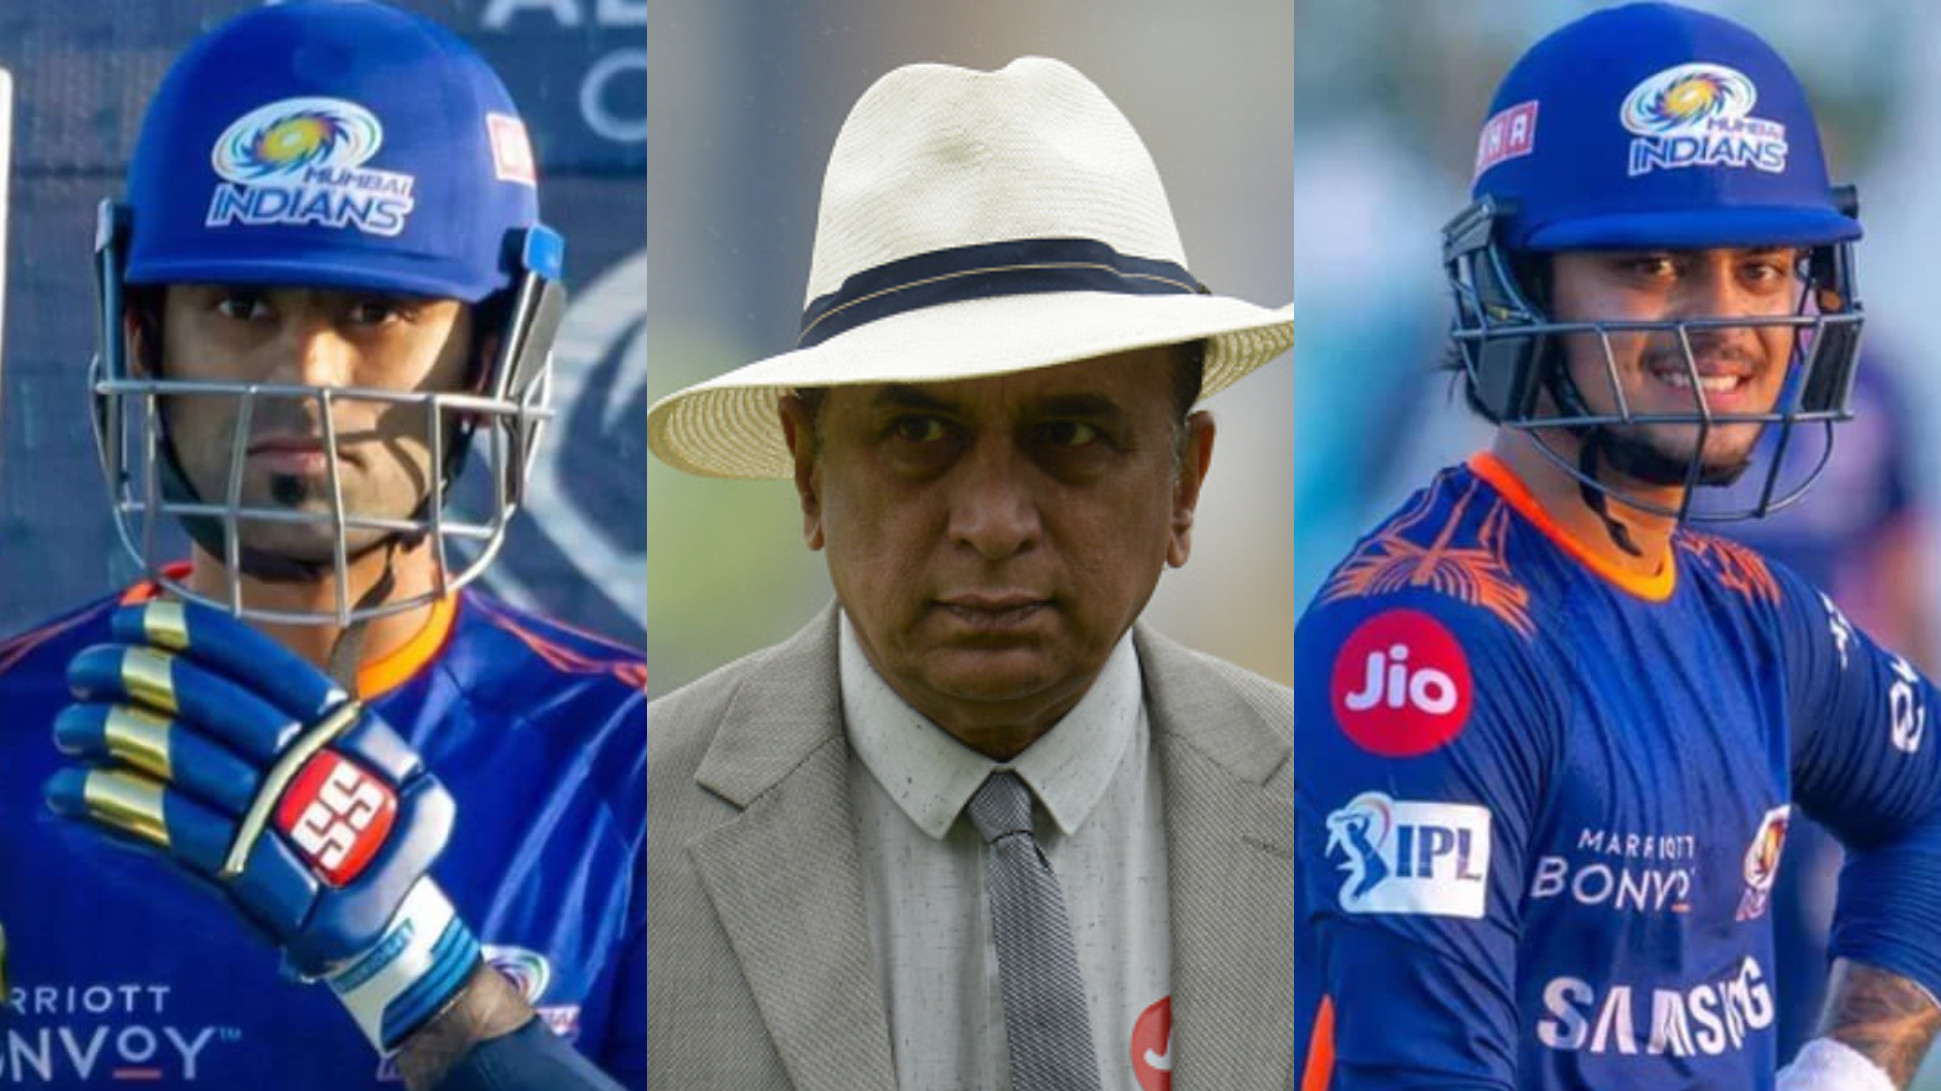 IPL 2021: They lack fire in the belly after getting India caps- Gavaskar on Suryakumar and Kishan’s loss of form